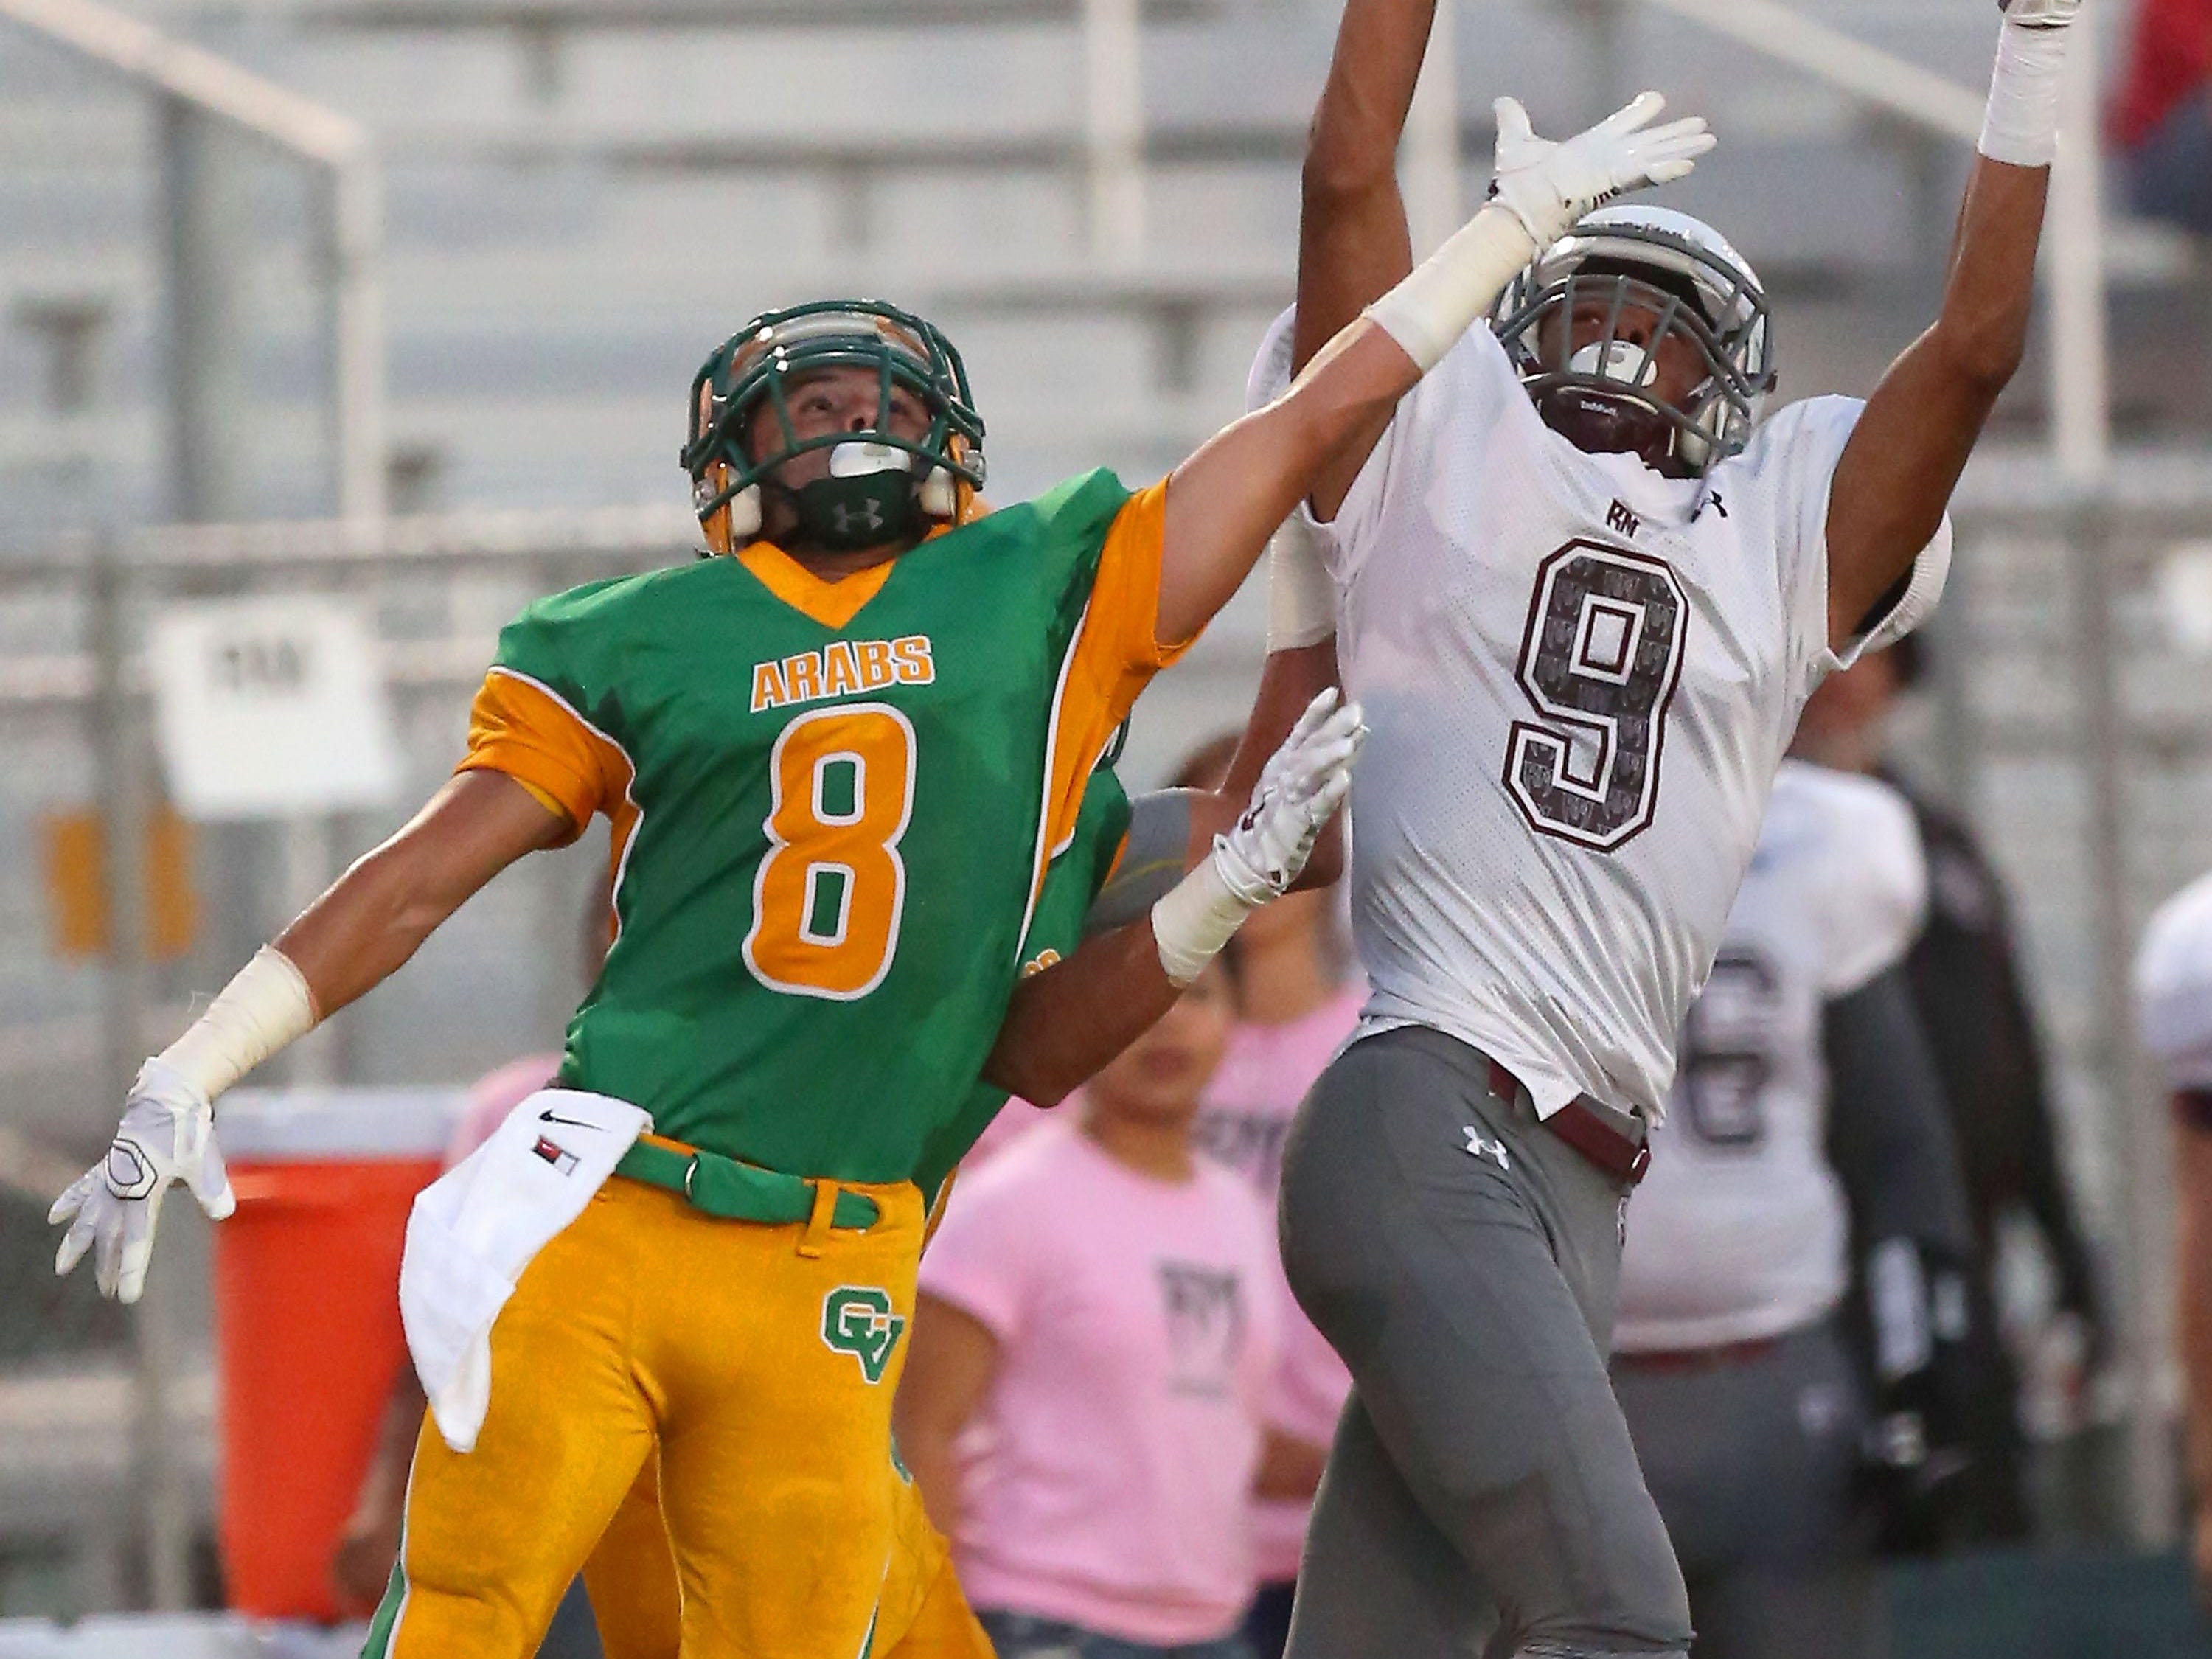 Charles Murrell hauls in a pass for Rancho Mirage’s first touchdown as Willy Ortiz, No. 8, of Coachella defends on Friday.